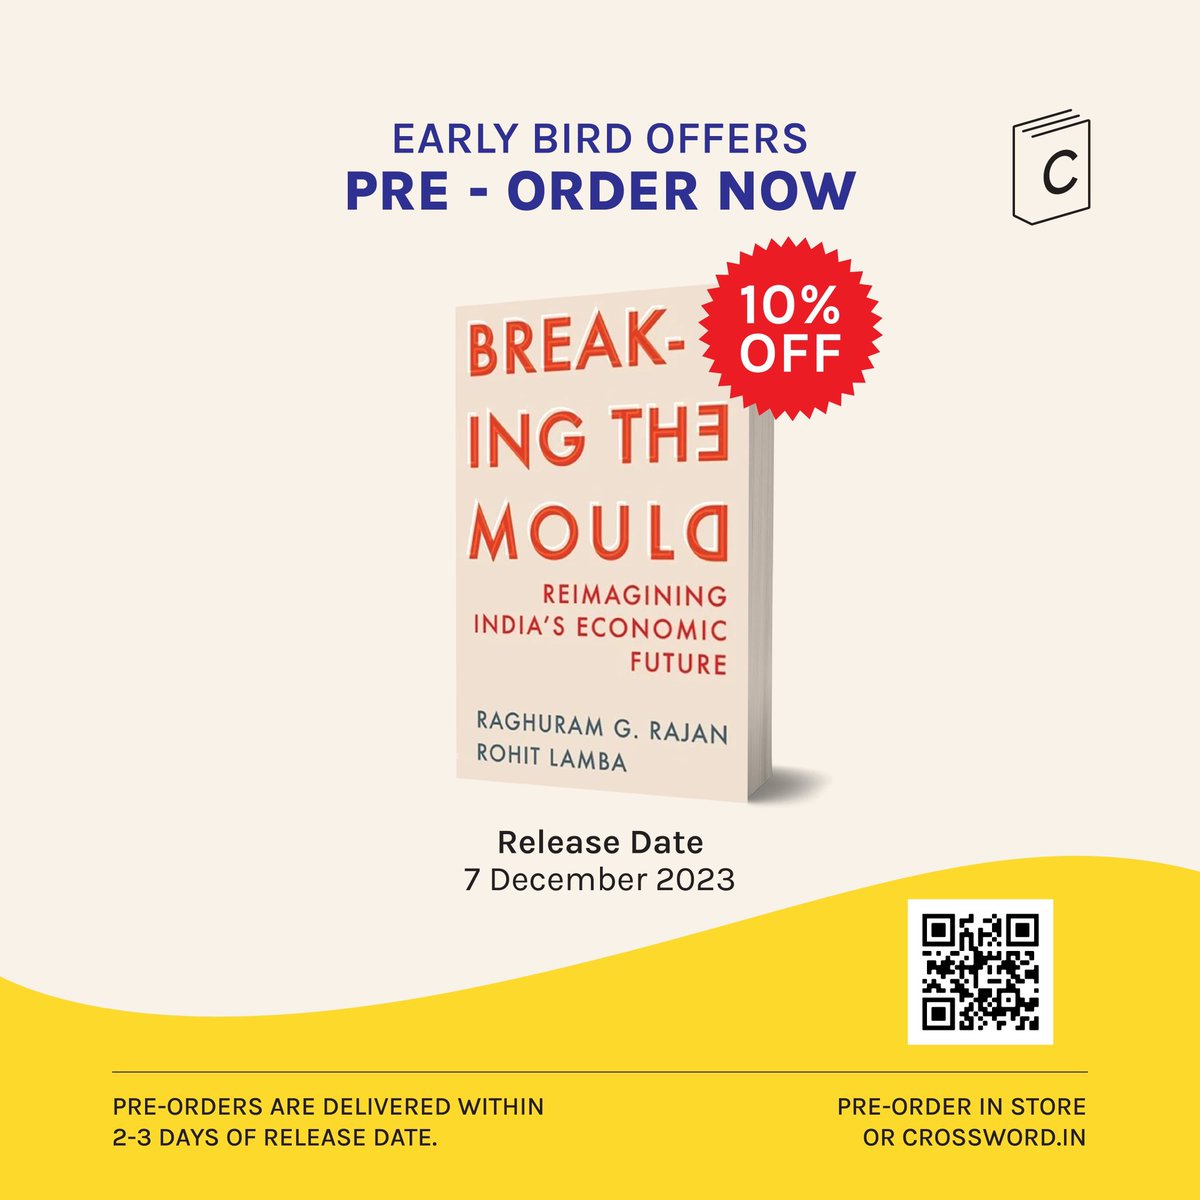 Discover how India can accelerate its economic development, invest in human capital, and break free from historical constraints with the book 'Breaking the Mould' co-authored by Raghuram G. Rajan and Rohit Lamba. 📚🌟 Pre-order now for 10% off! crossword.in/collections/pr…